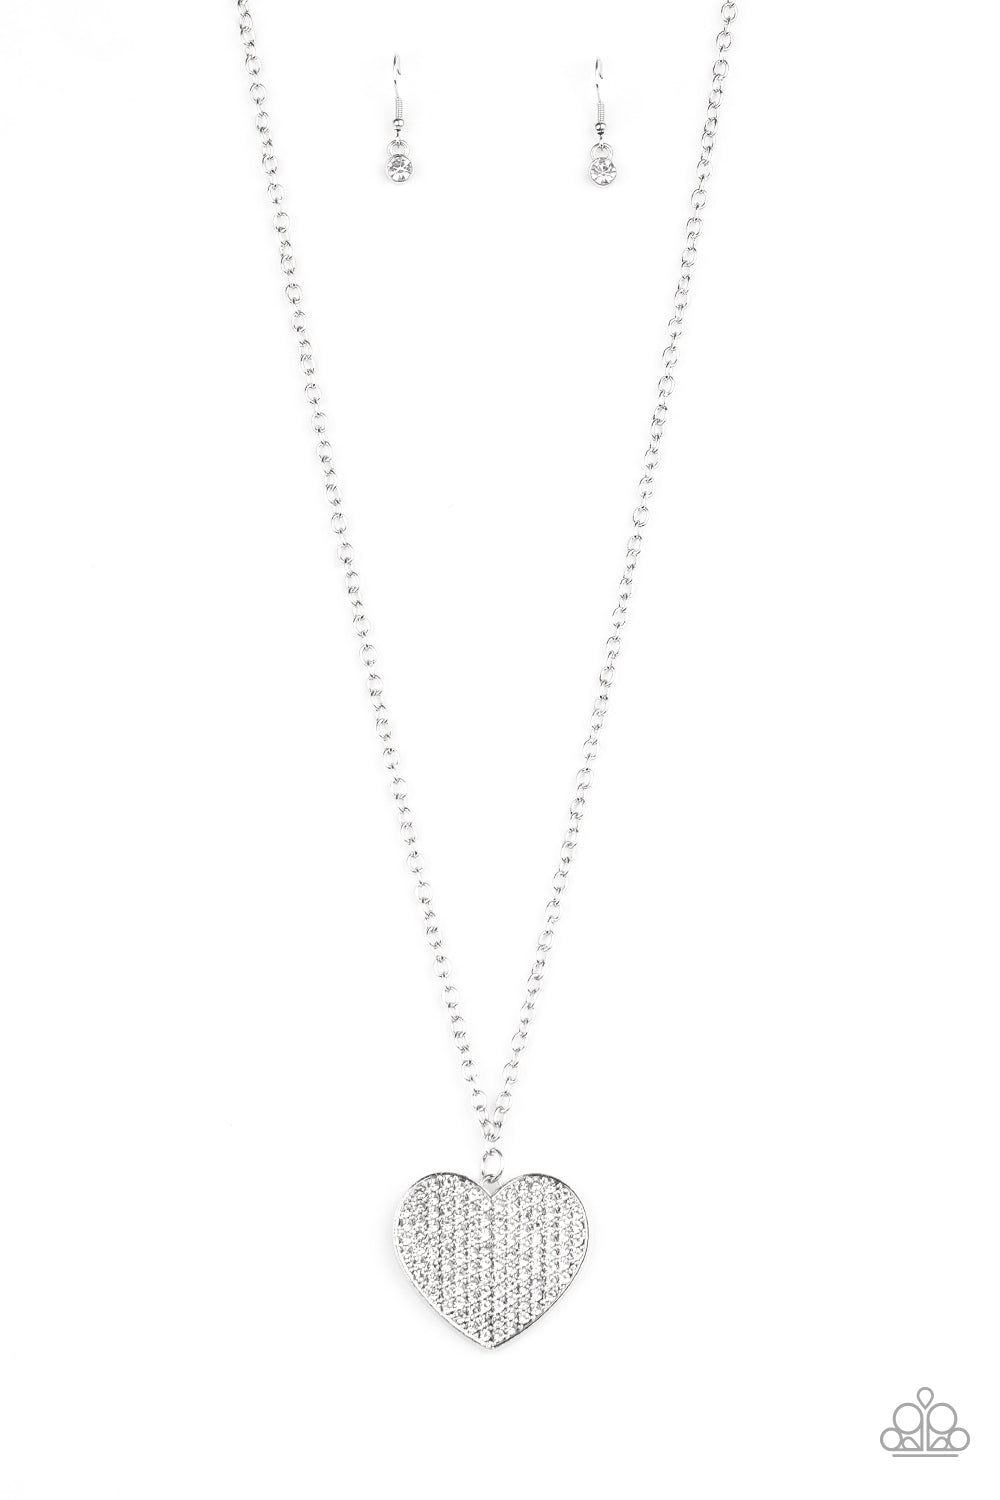 Have to Learn the HEART Way - white - Paparazzi necklace